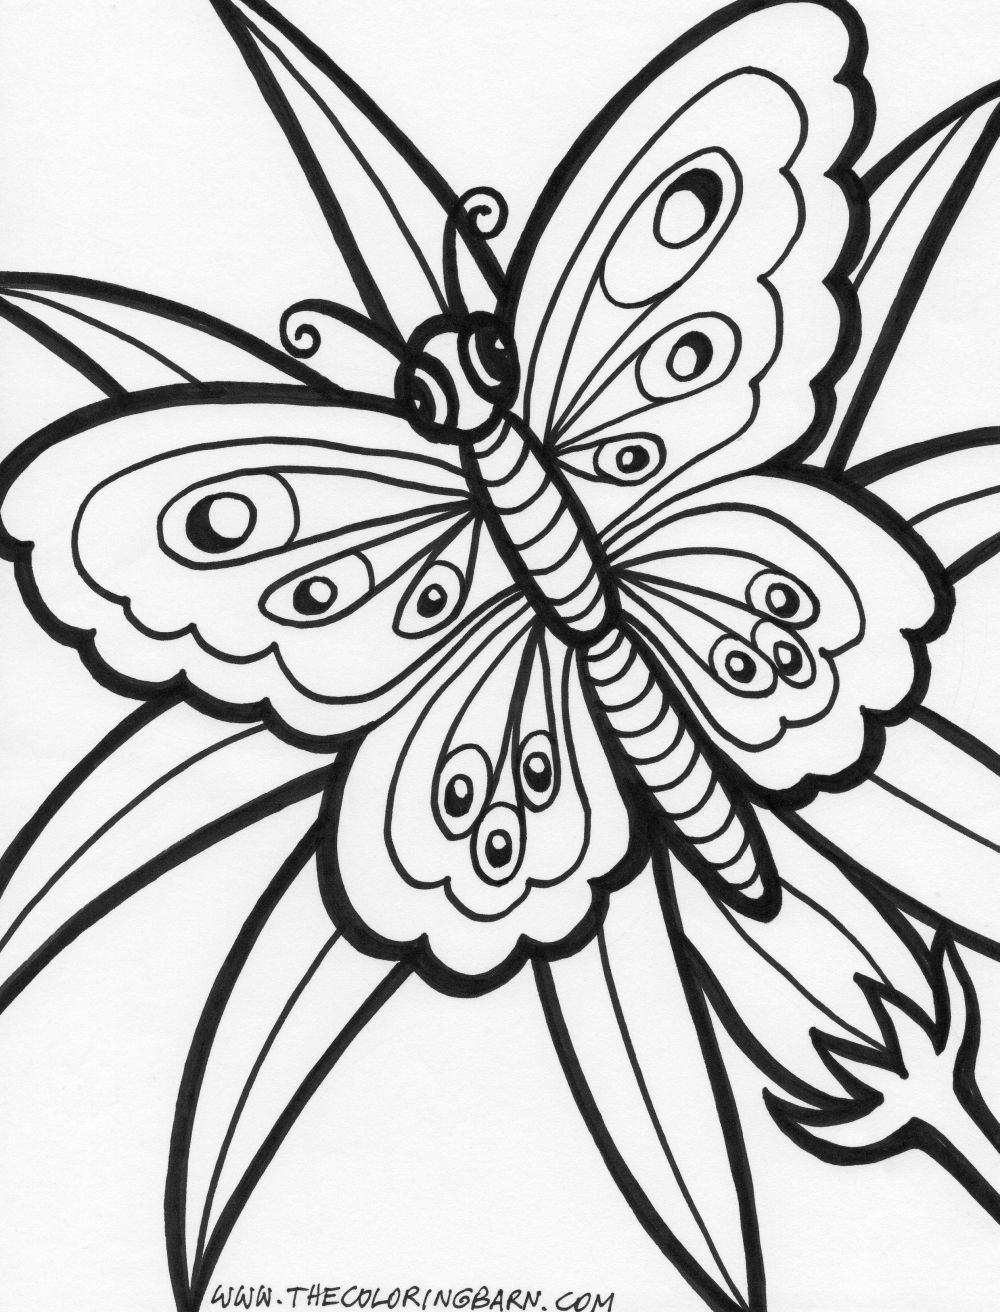  Butterfly coloring pages | Butterfly coloring pages for kids | #38